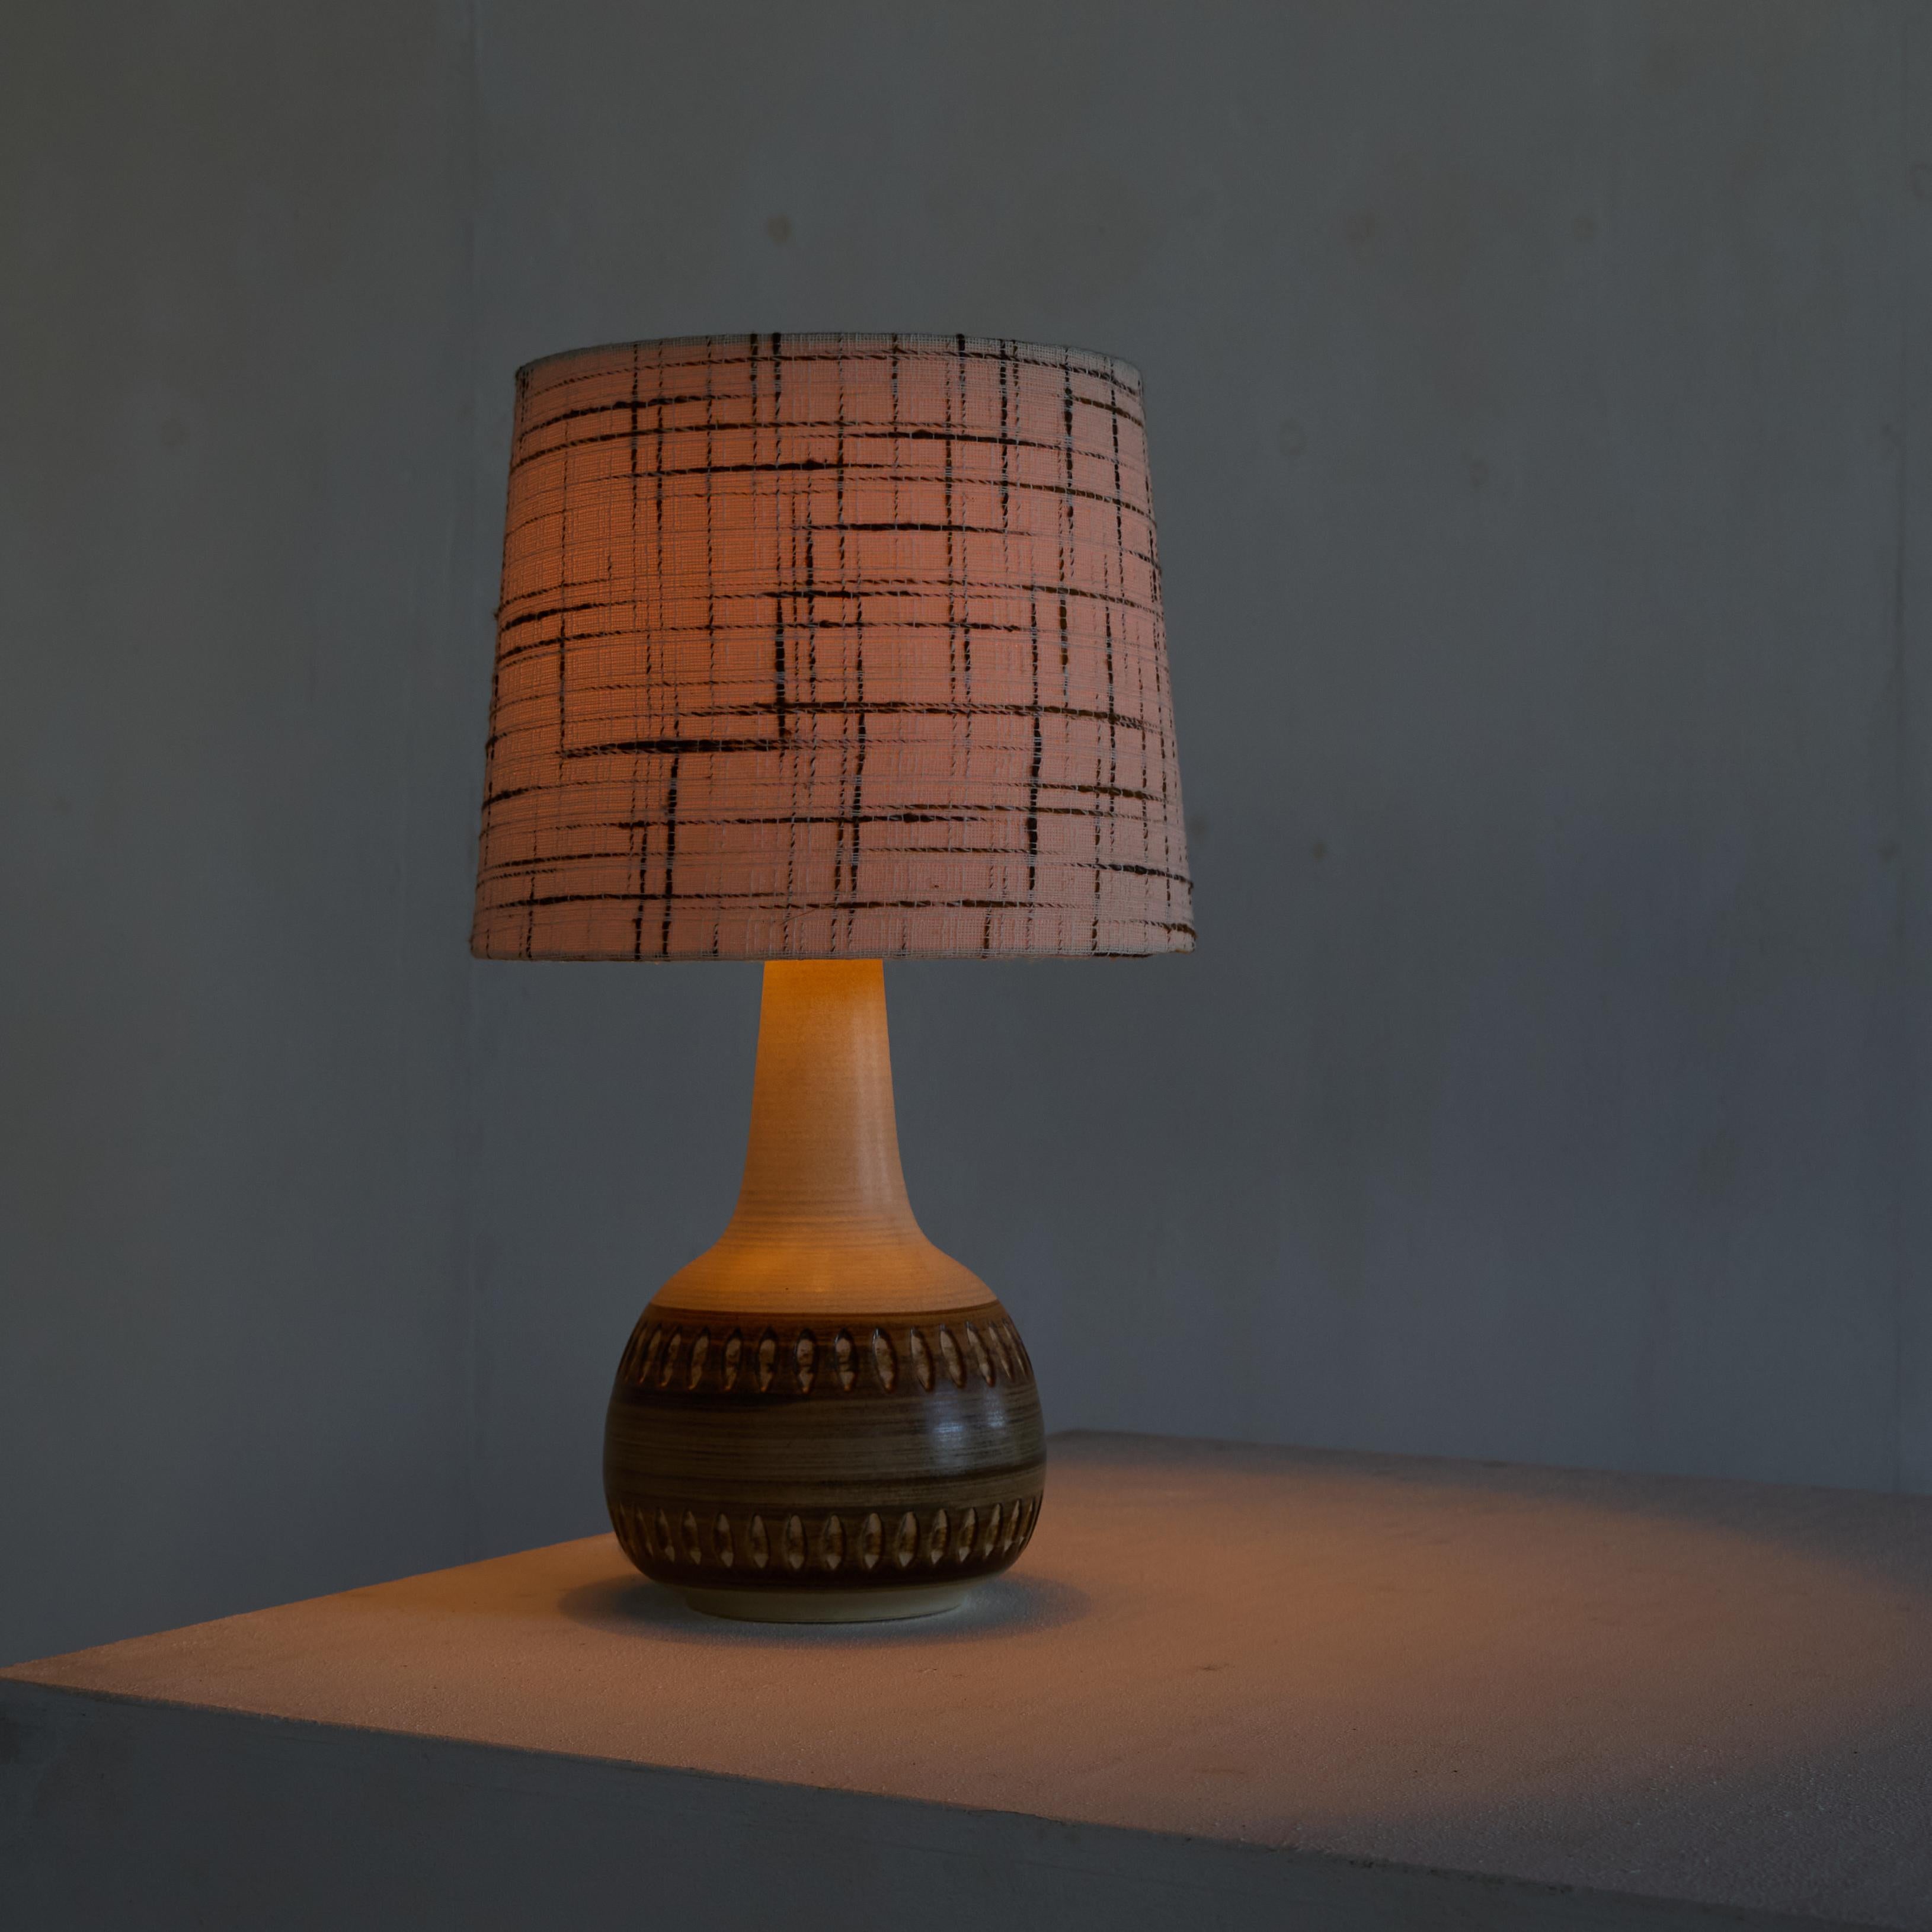 20th Century Søholm Stentøj Danish Studio Pottery Table Lamp with Original Shade 1960s For Sale